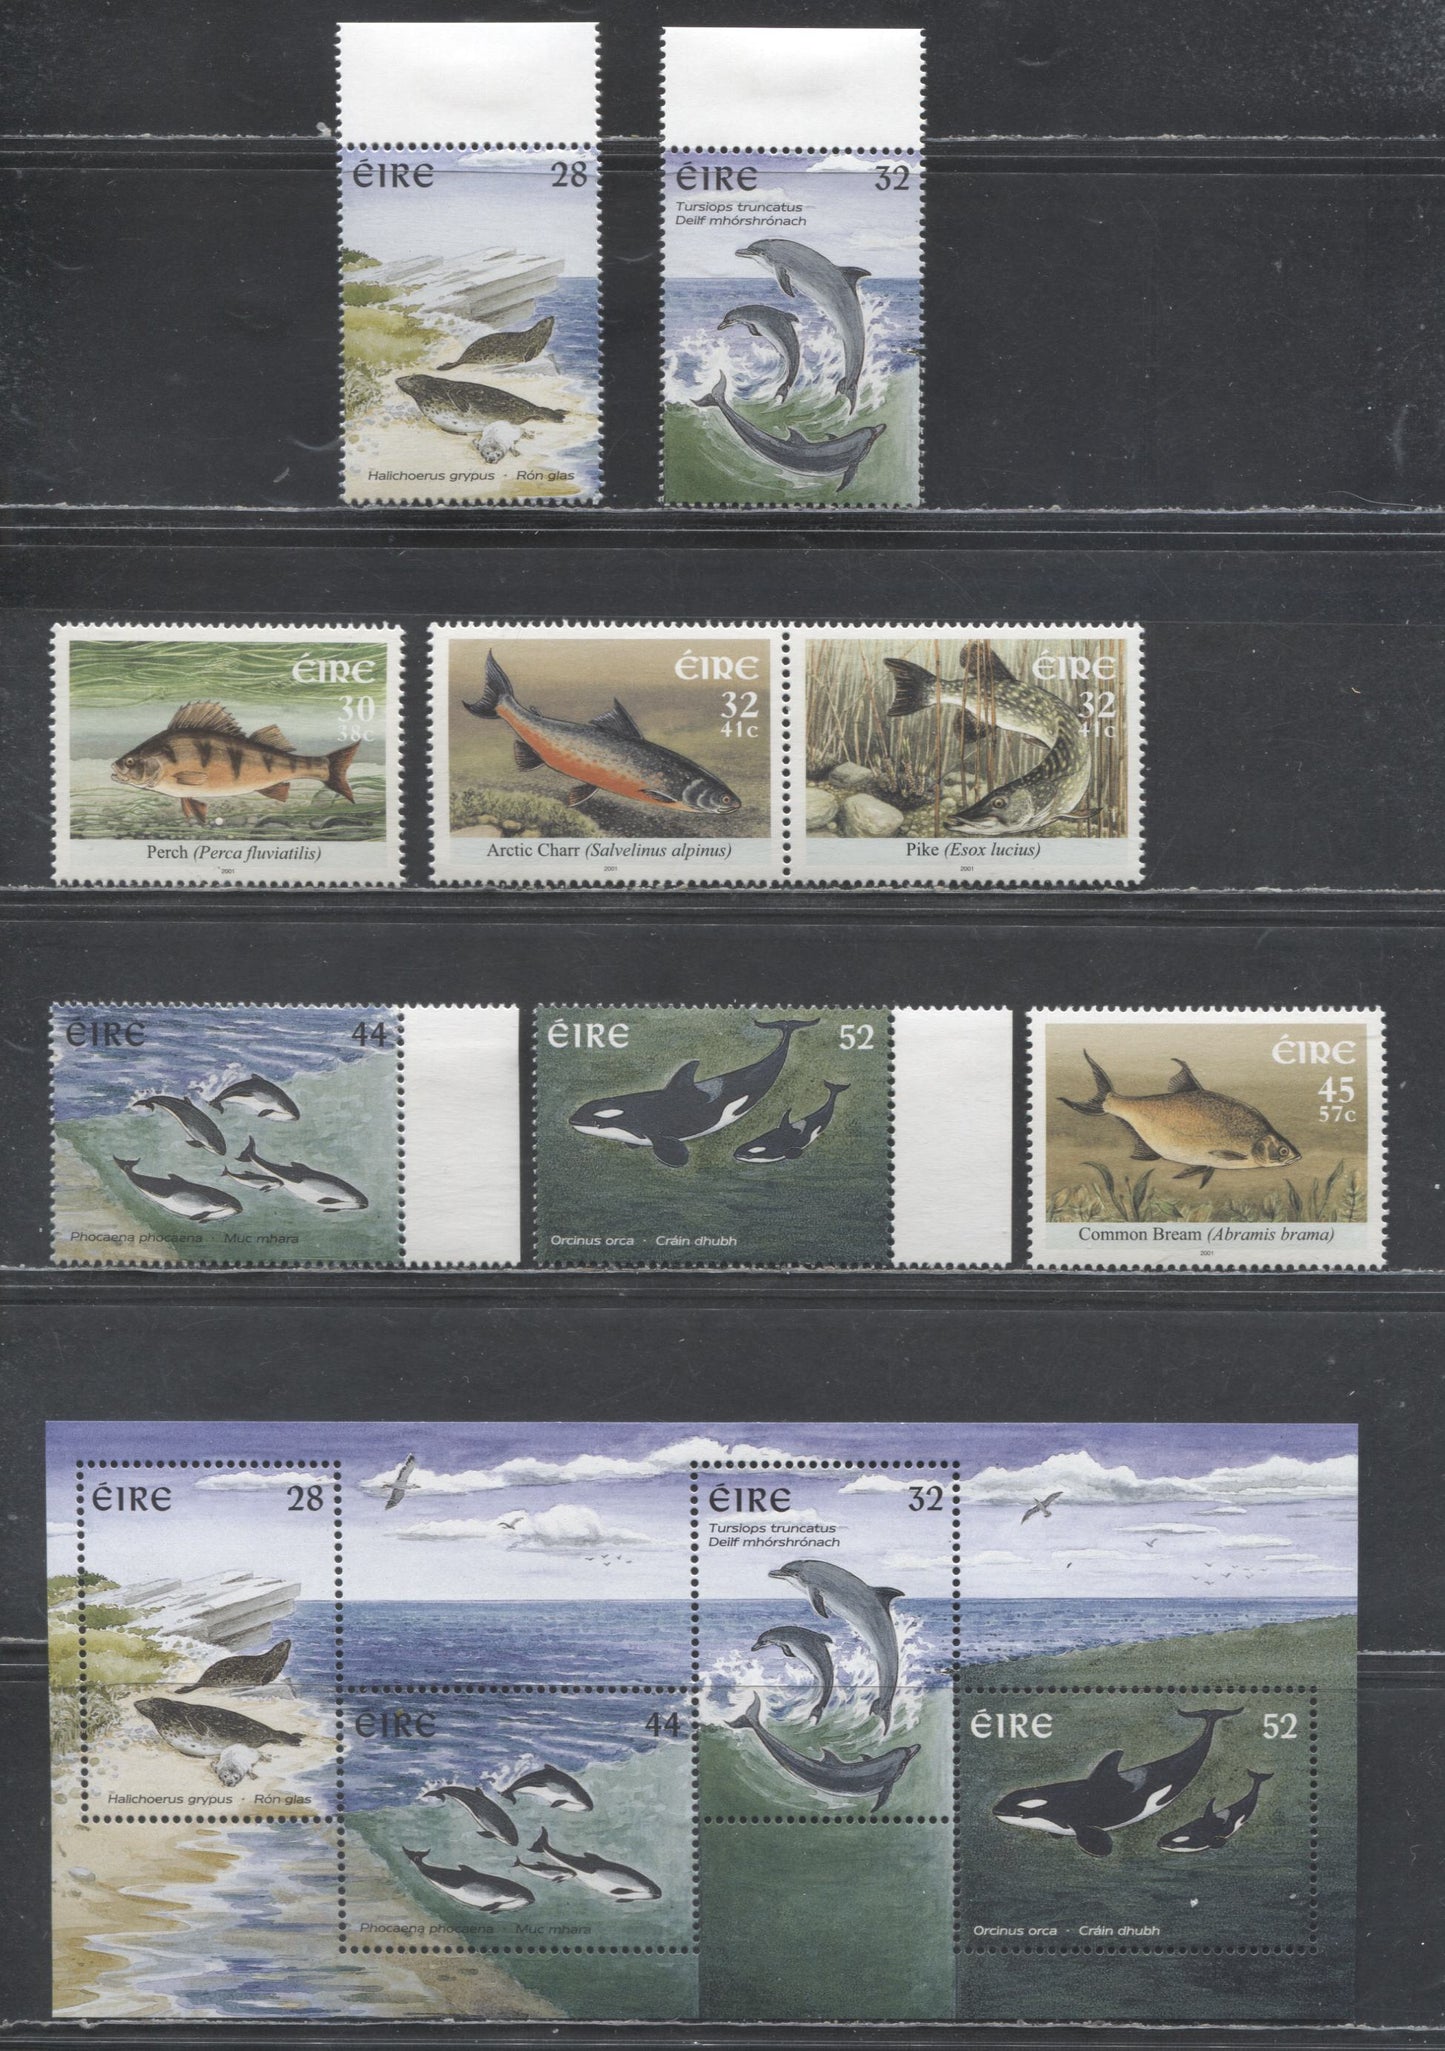 Lot 52 Ireland SC#1049/1346a 1997-2001 Marine Mammals - Fish, 8 VFOG/NH Singles, Pair & Souvenir Sheet Of 4, Click on Listing to See ALL Pictures, 2017 Scott Cat. $18.45